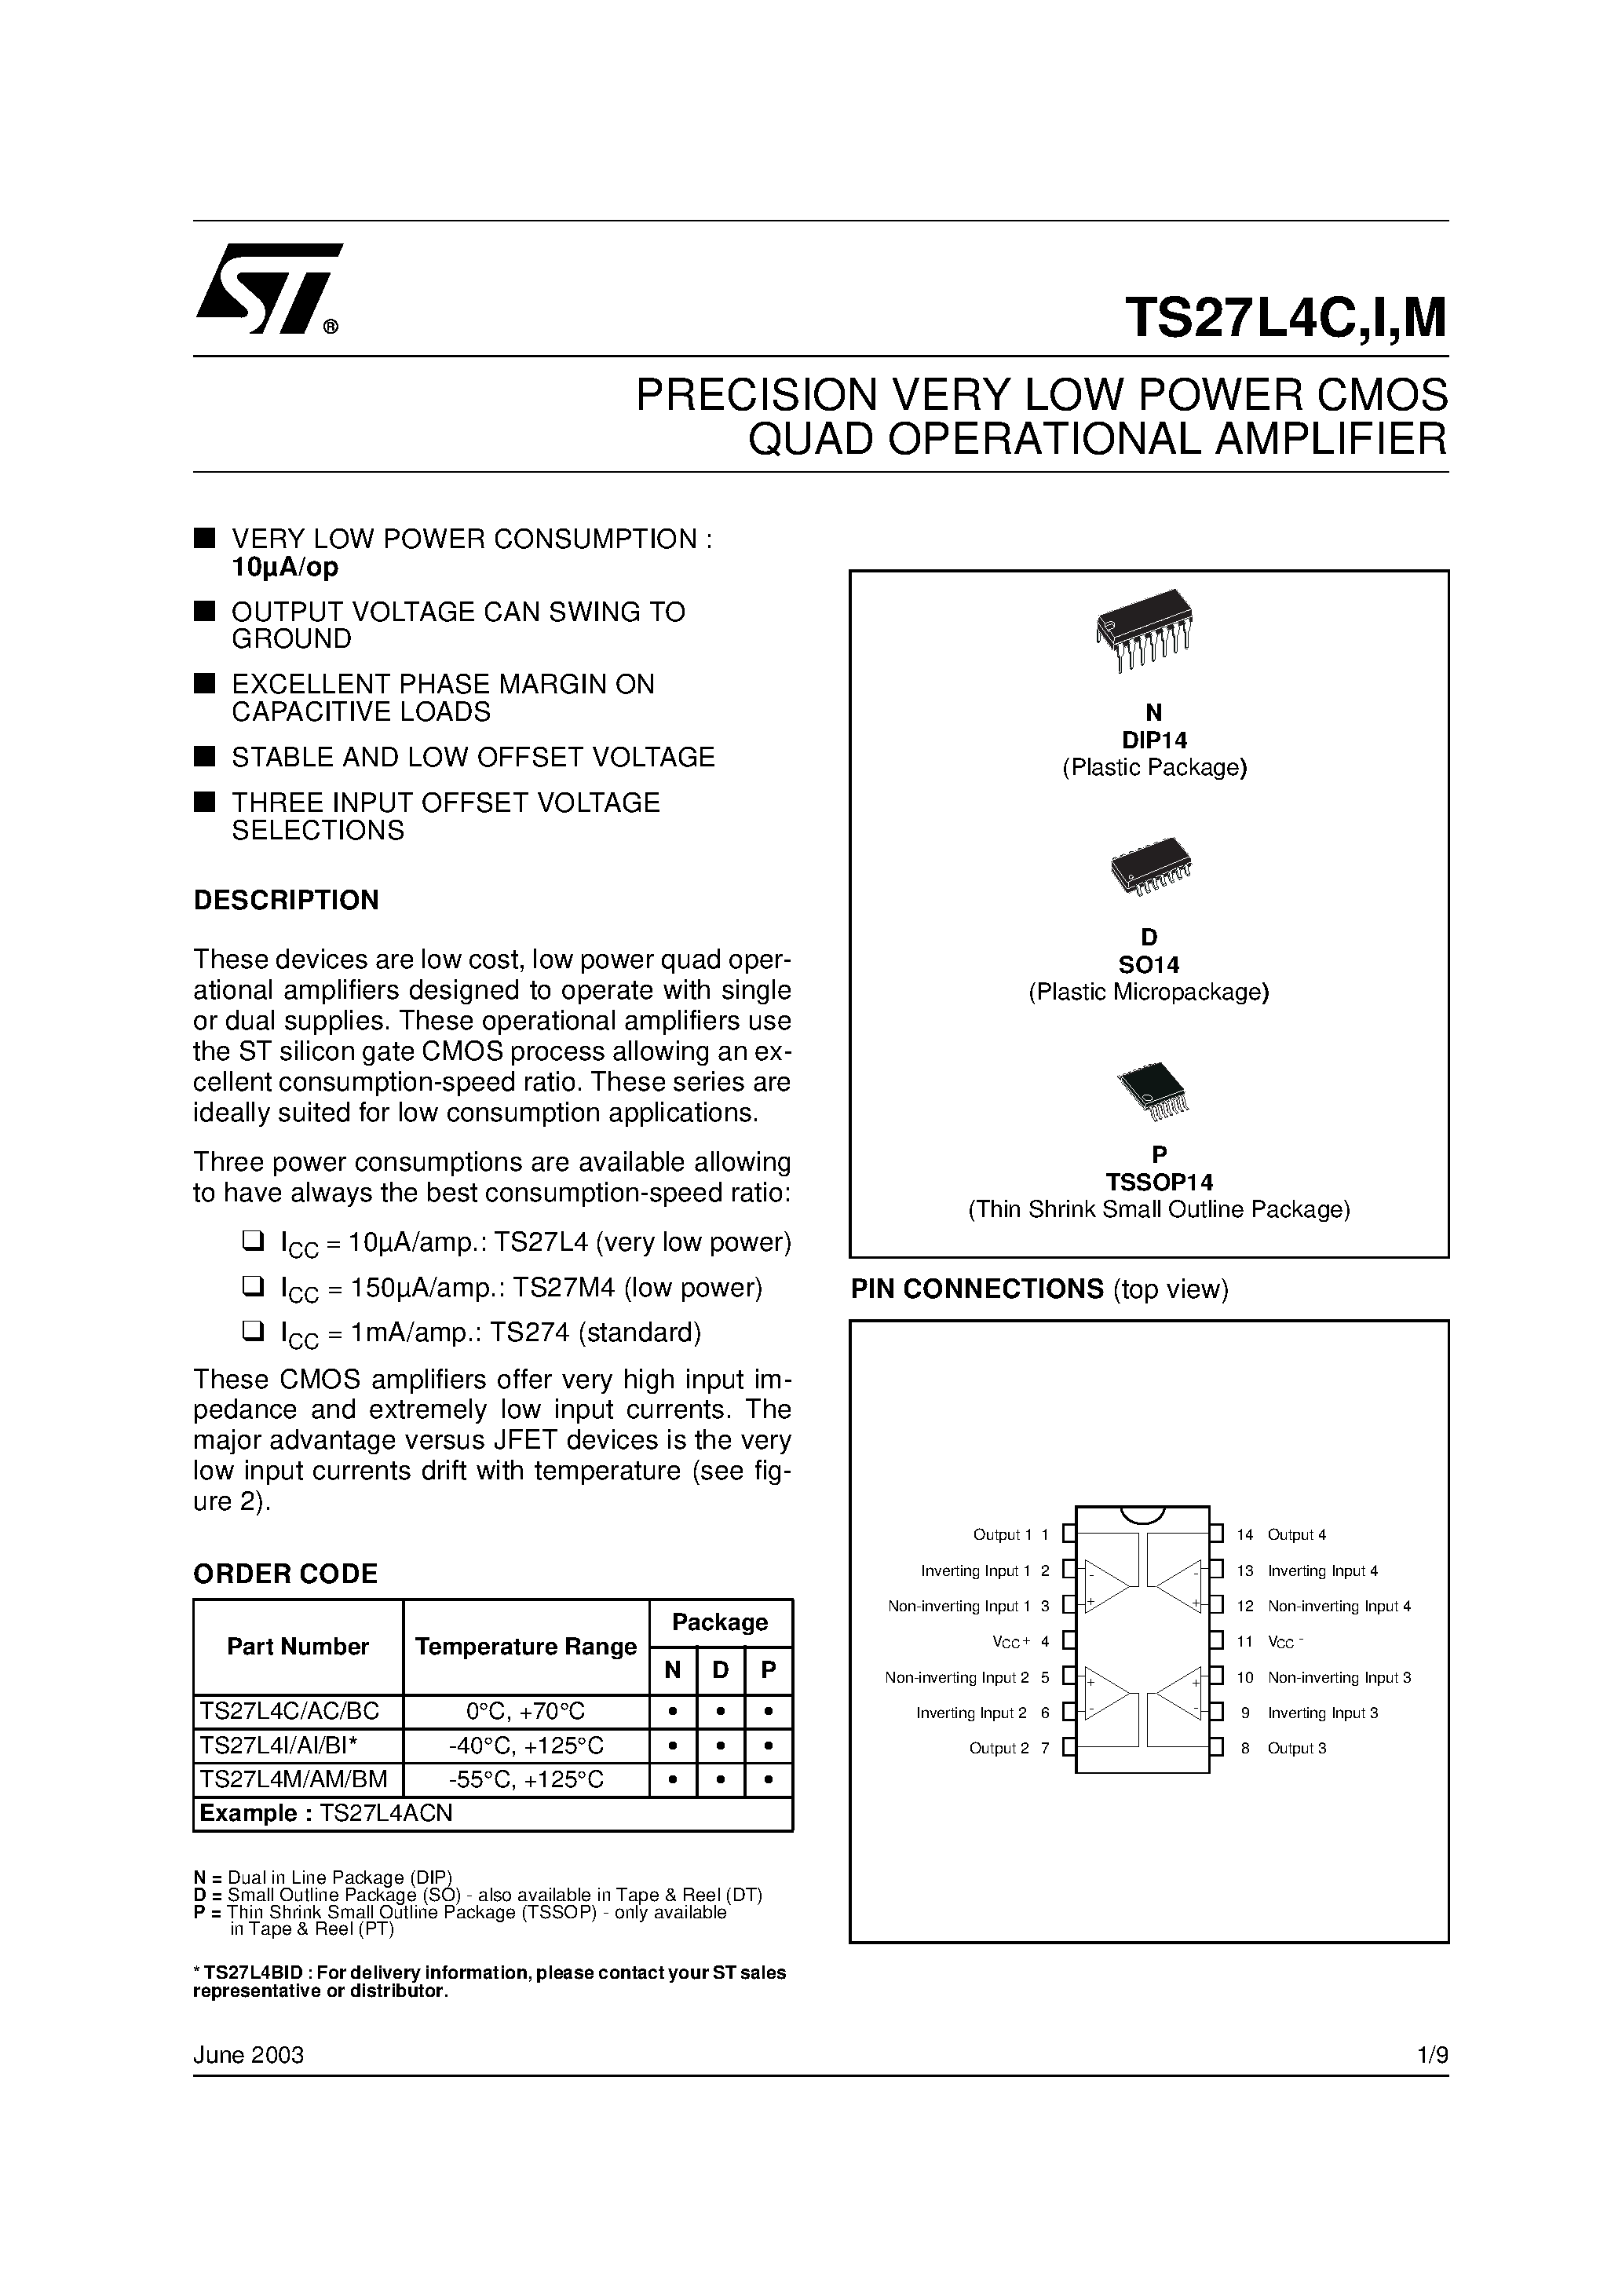 Datasheet TS27L4C - PRECISION VERY LOW POWER CMOS QUAD OPERATIONAL AMPLIFIER page 1